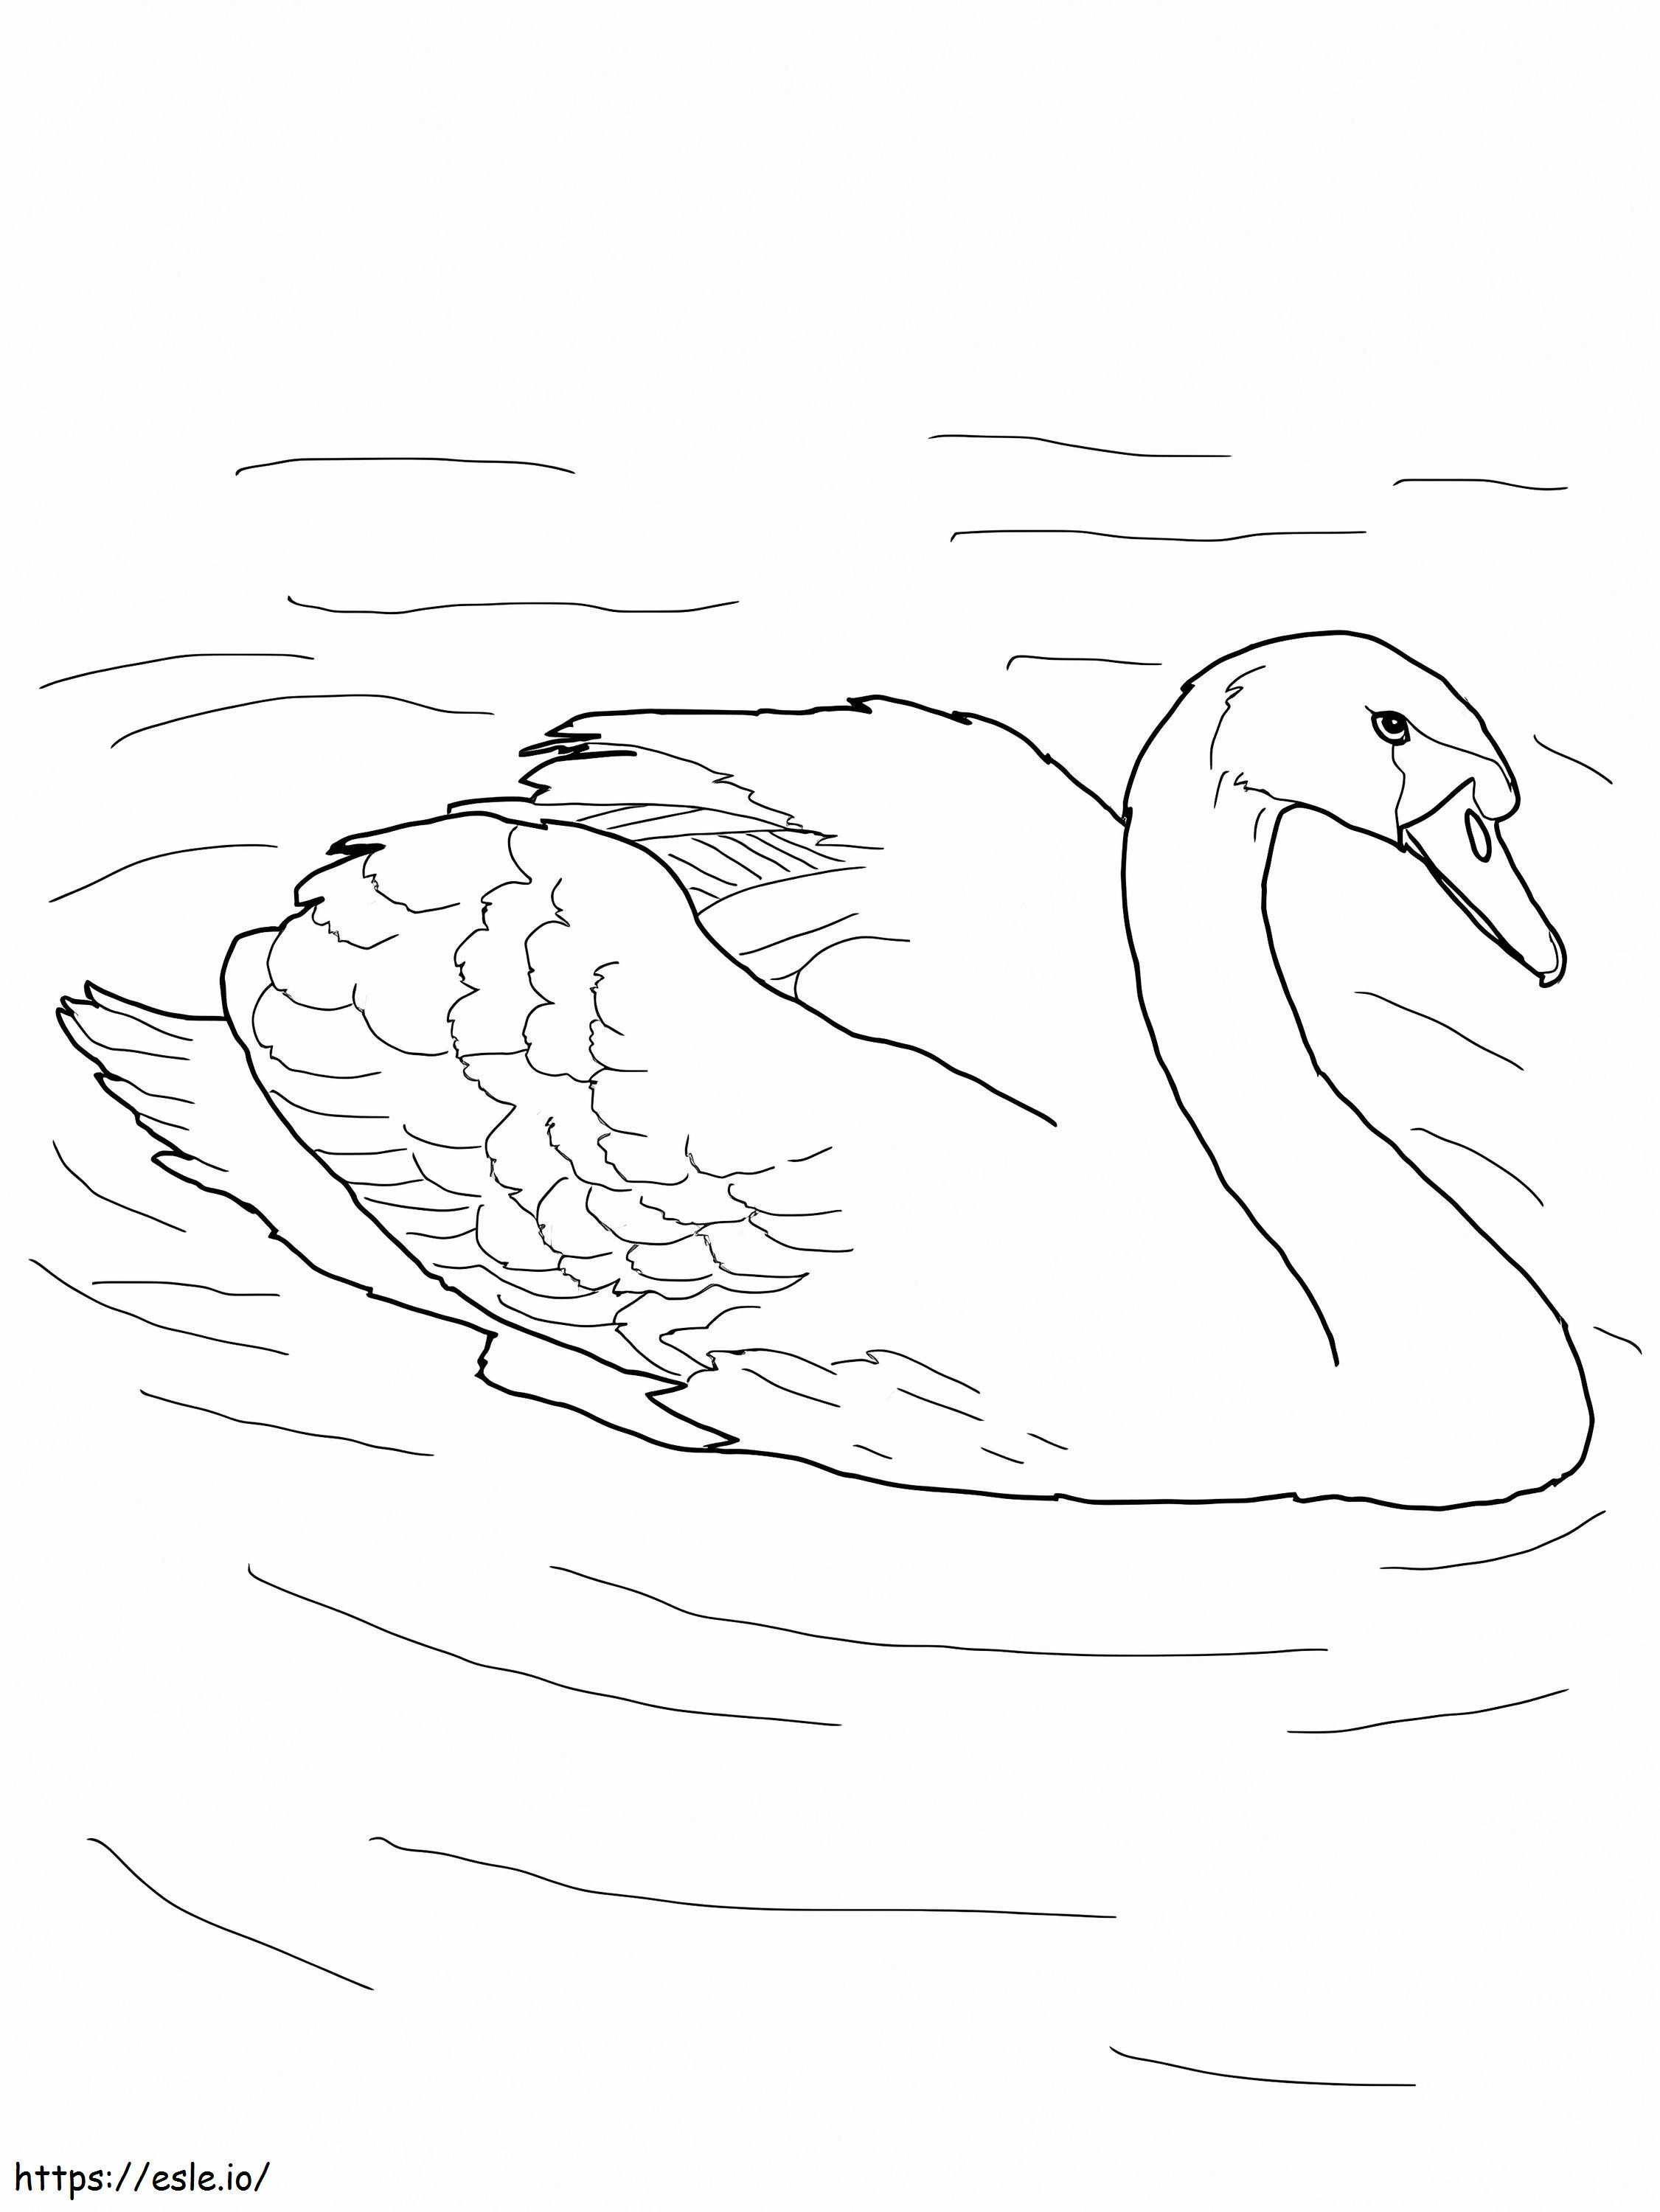 Mute Swan In A Pond coloring page